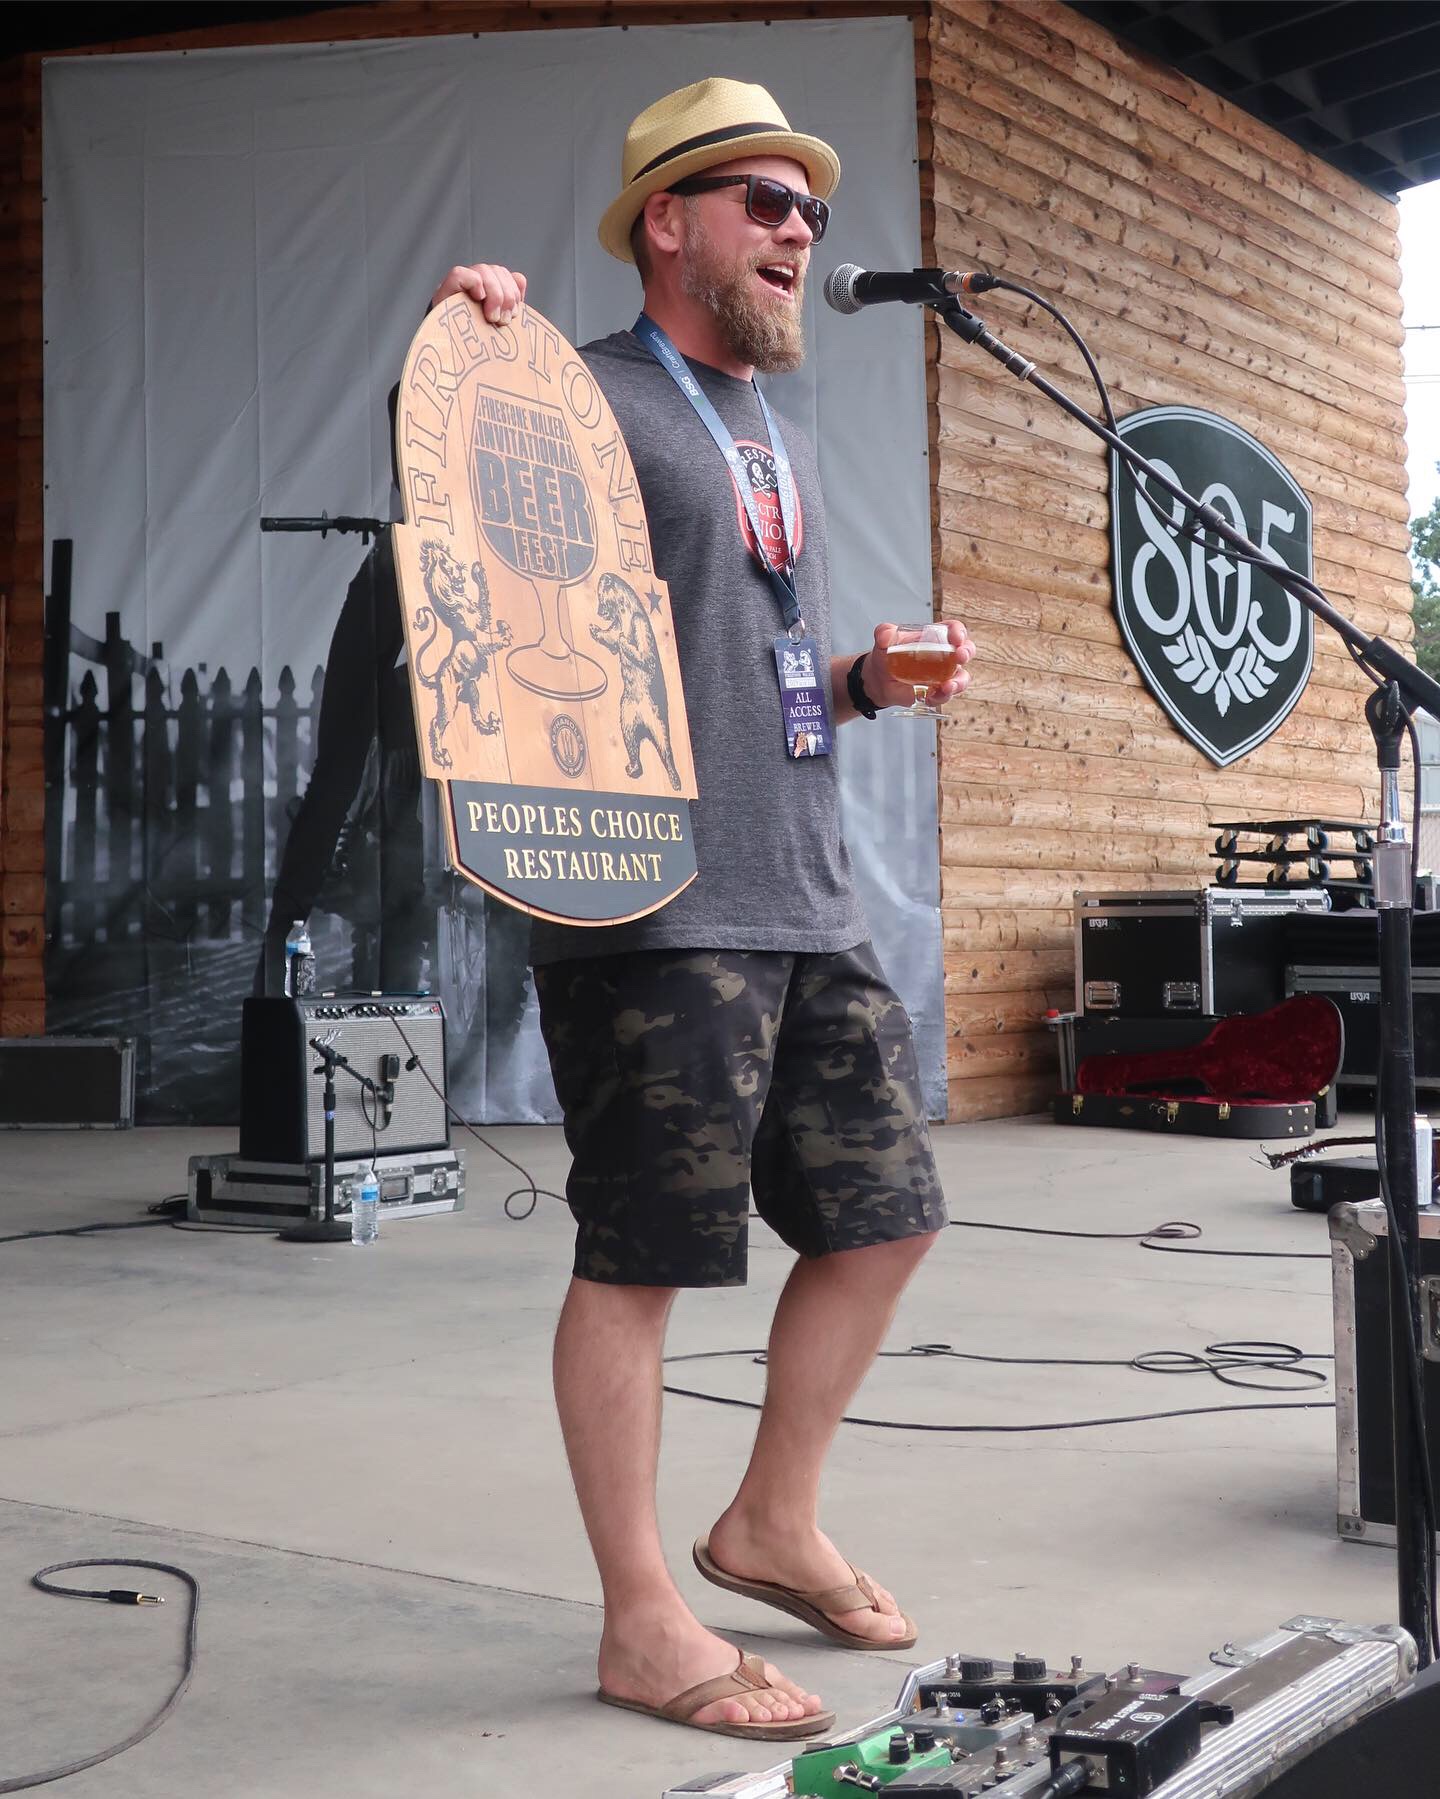 Matt Brynildson presenting the 2019 People's Choice Award to Fish Gaucho at the 2019 Firestone Walker Invitational Beer Fest.